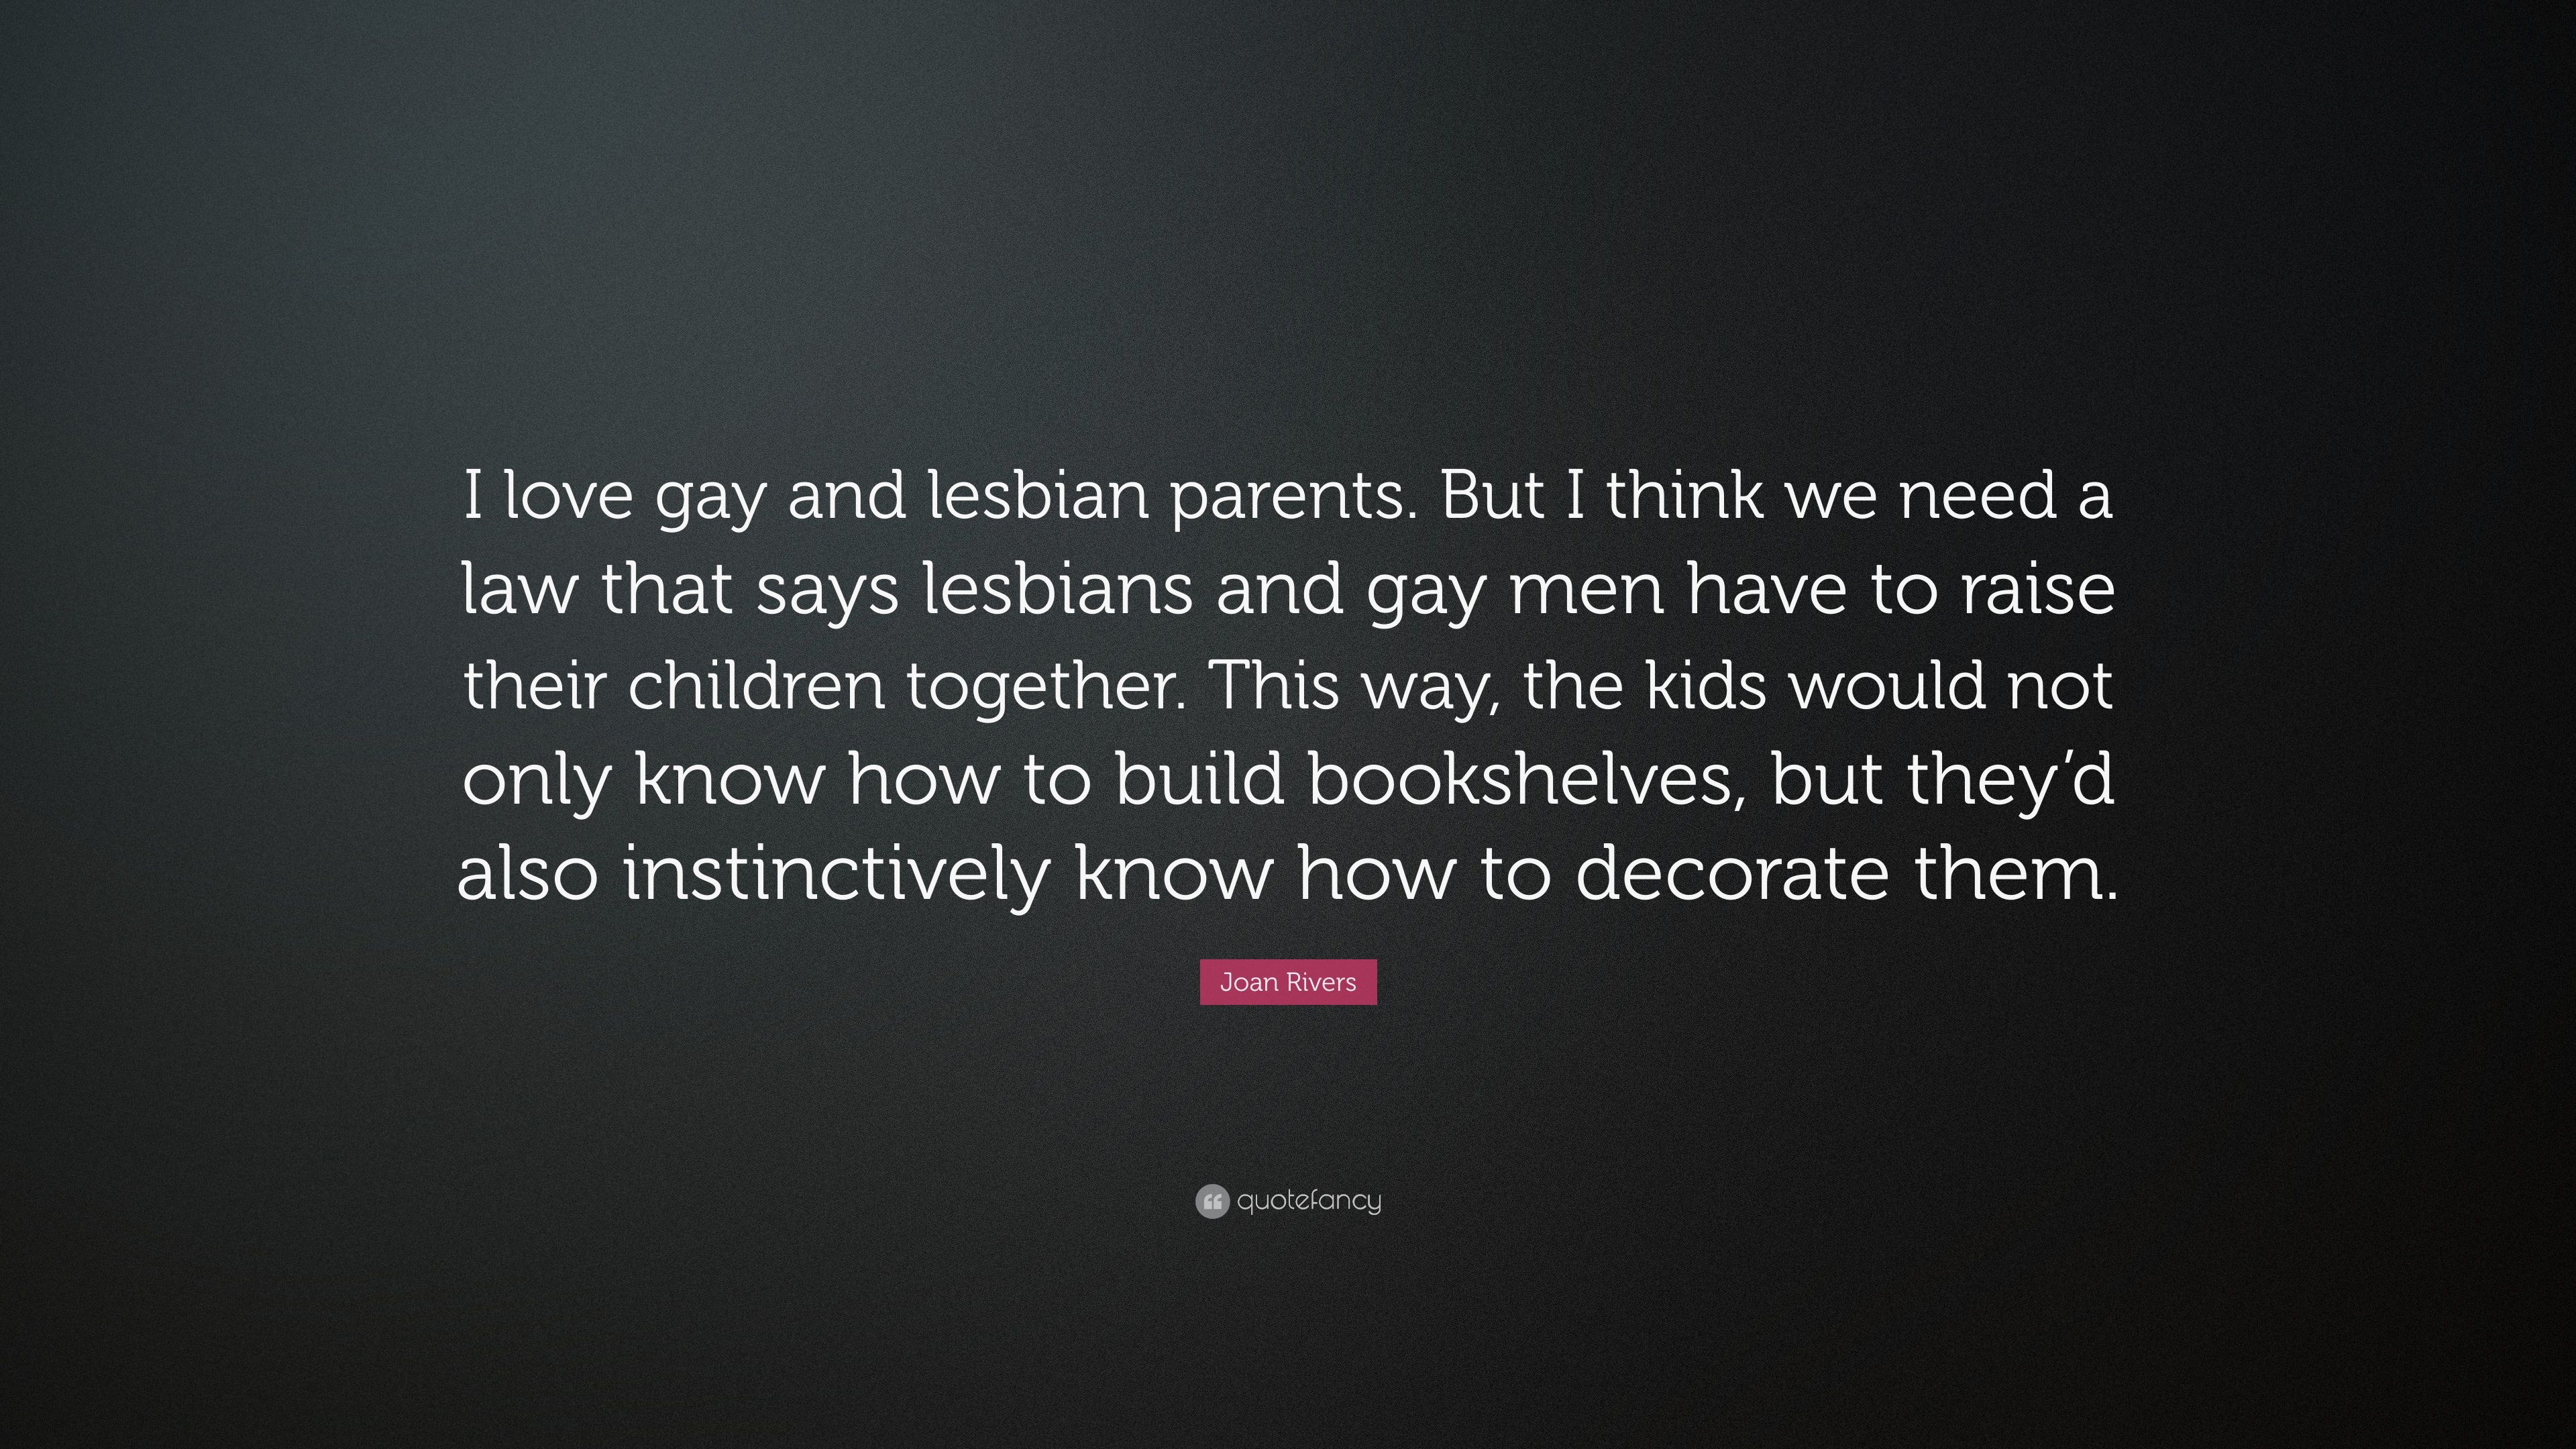 Joan Rivers Quote: “I love gay and lesbian parents. But I think we